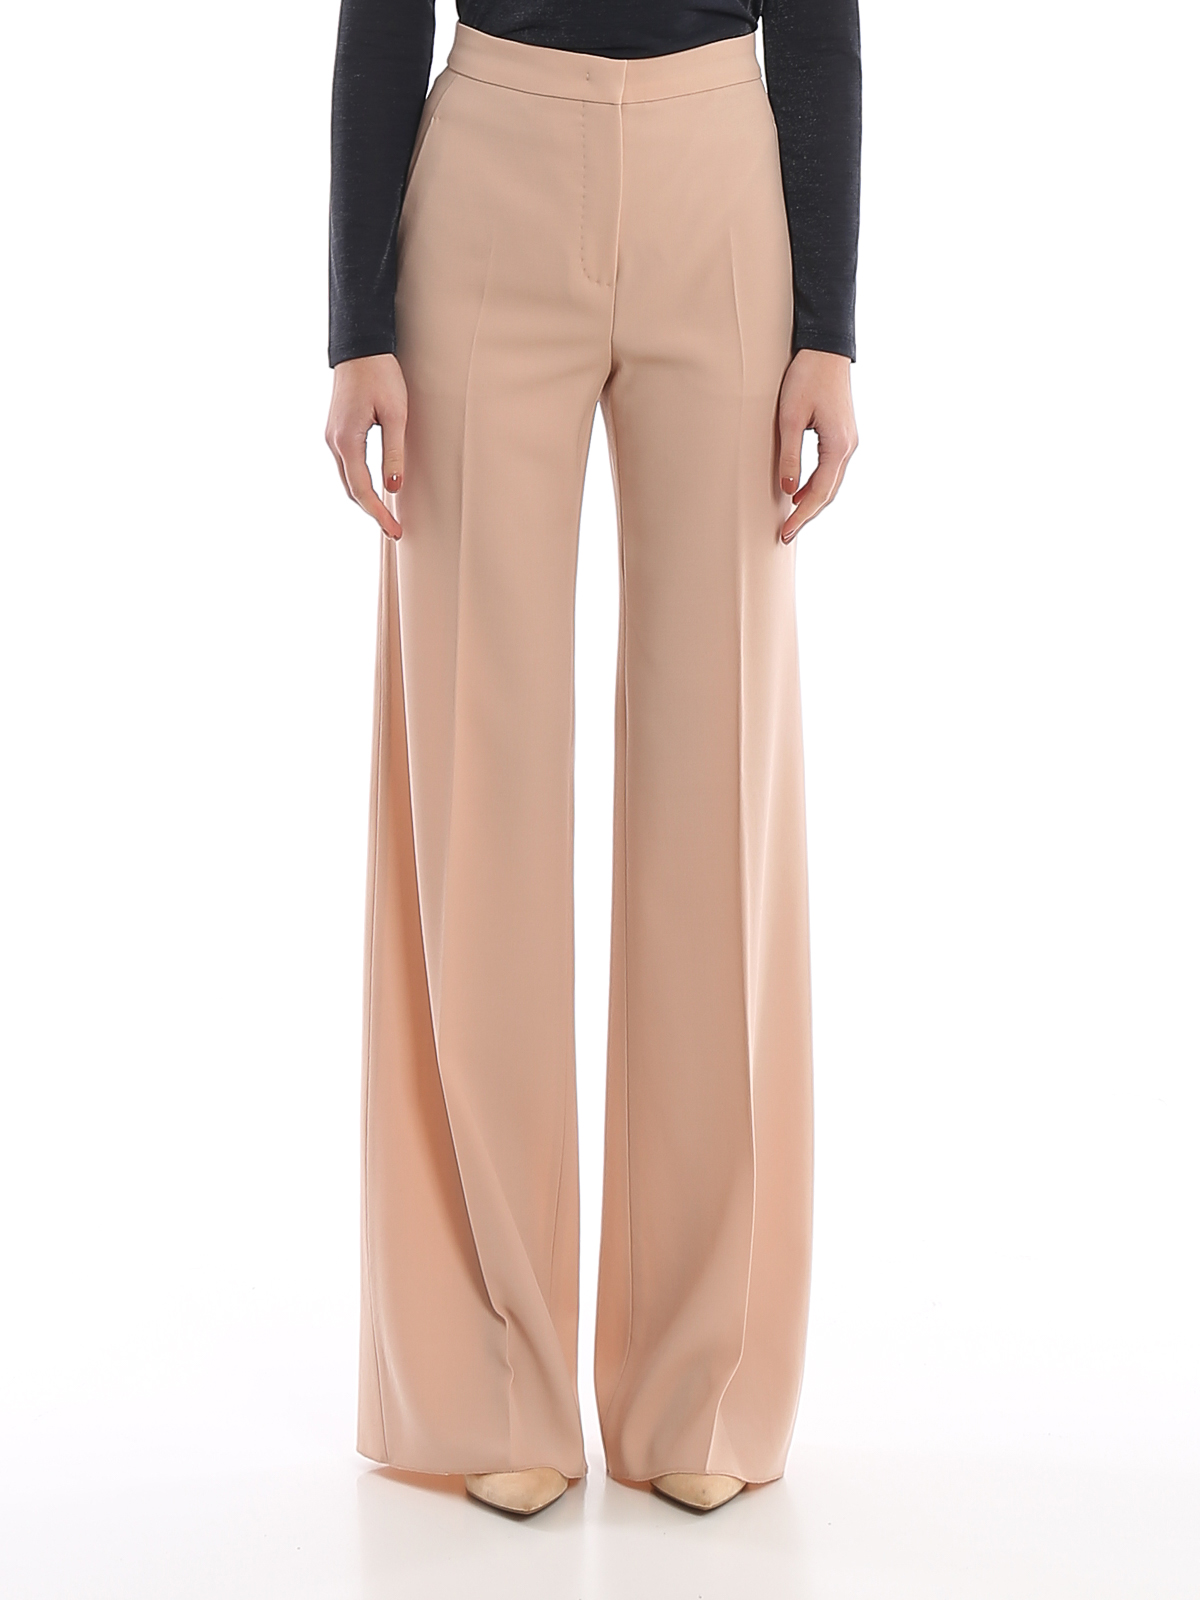 Max Mara Studio Jerta women's trousers in technical fabric Black | Buy  online at the best price on caposerio.com